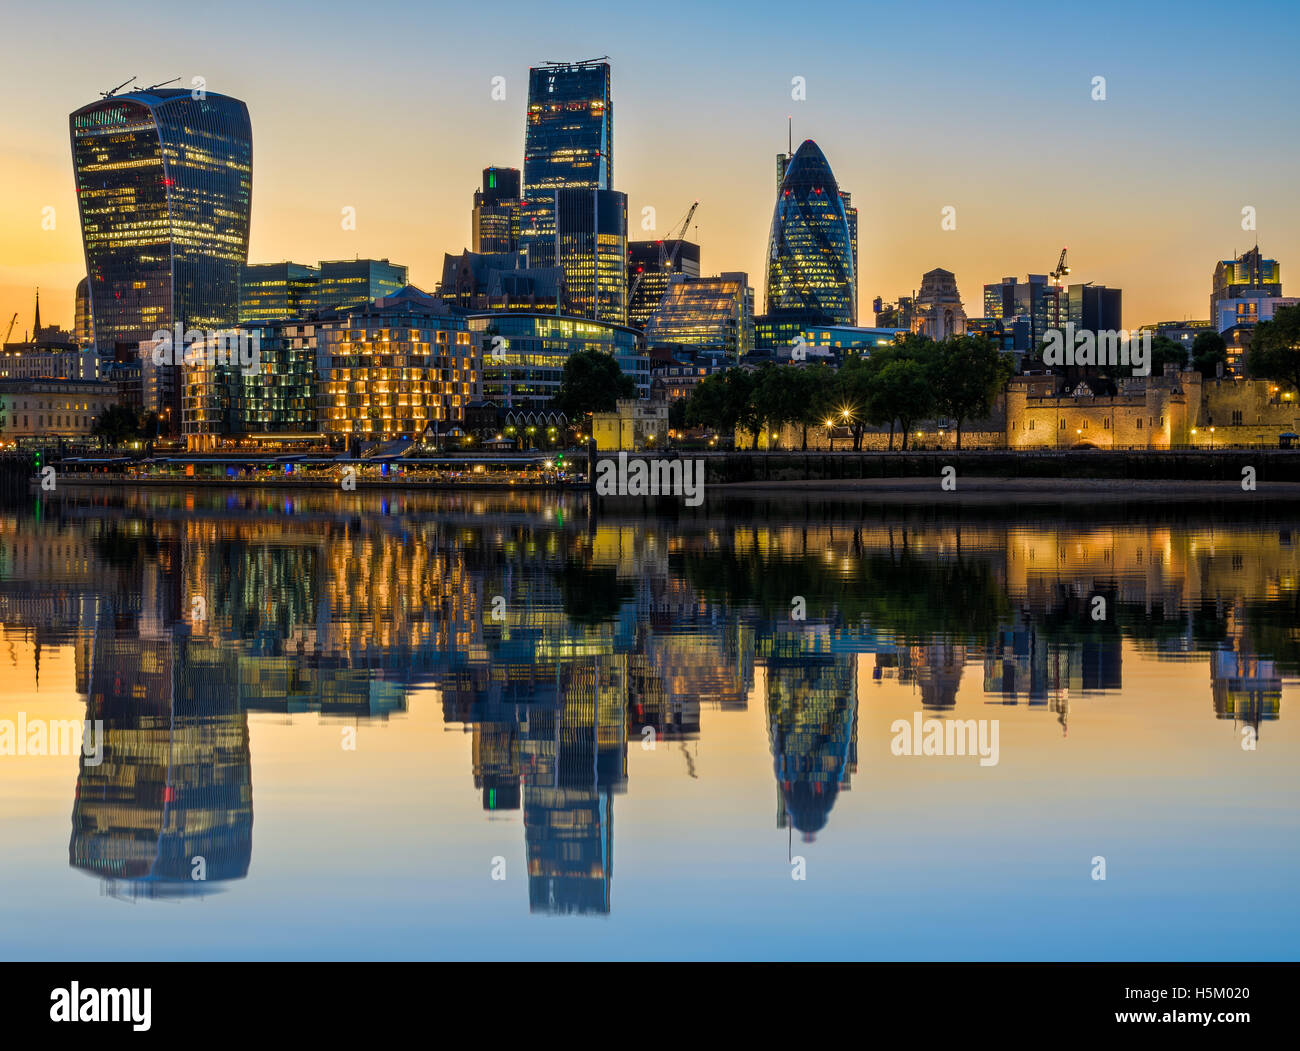 Illuminated London cityscape at sunset with reflection from river Thames Stock Photo